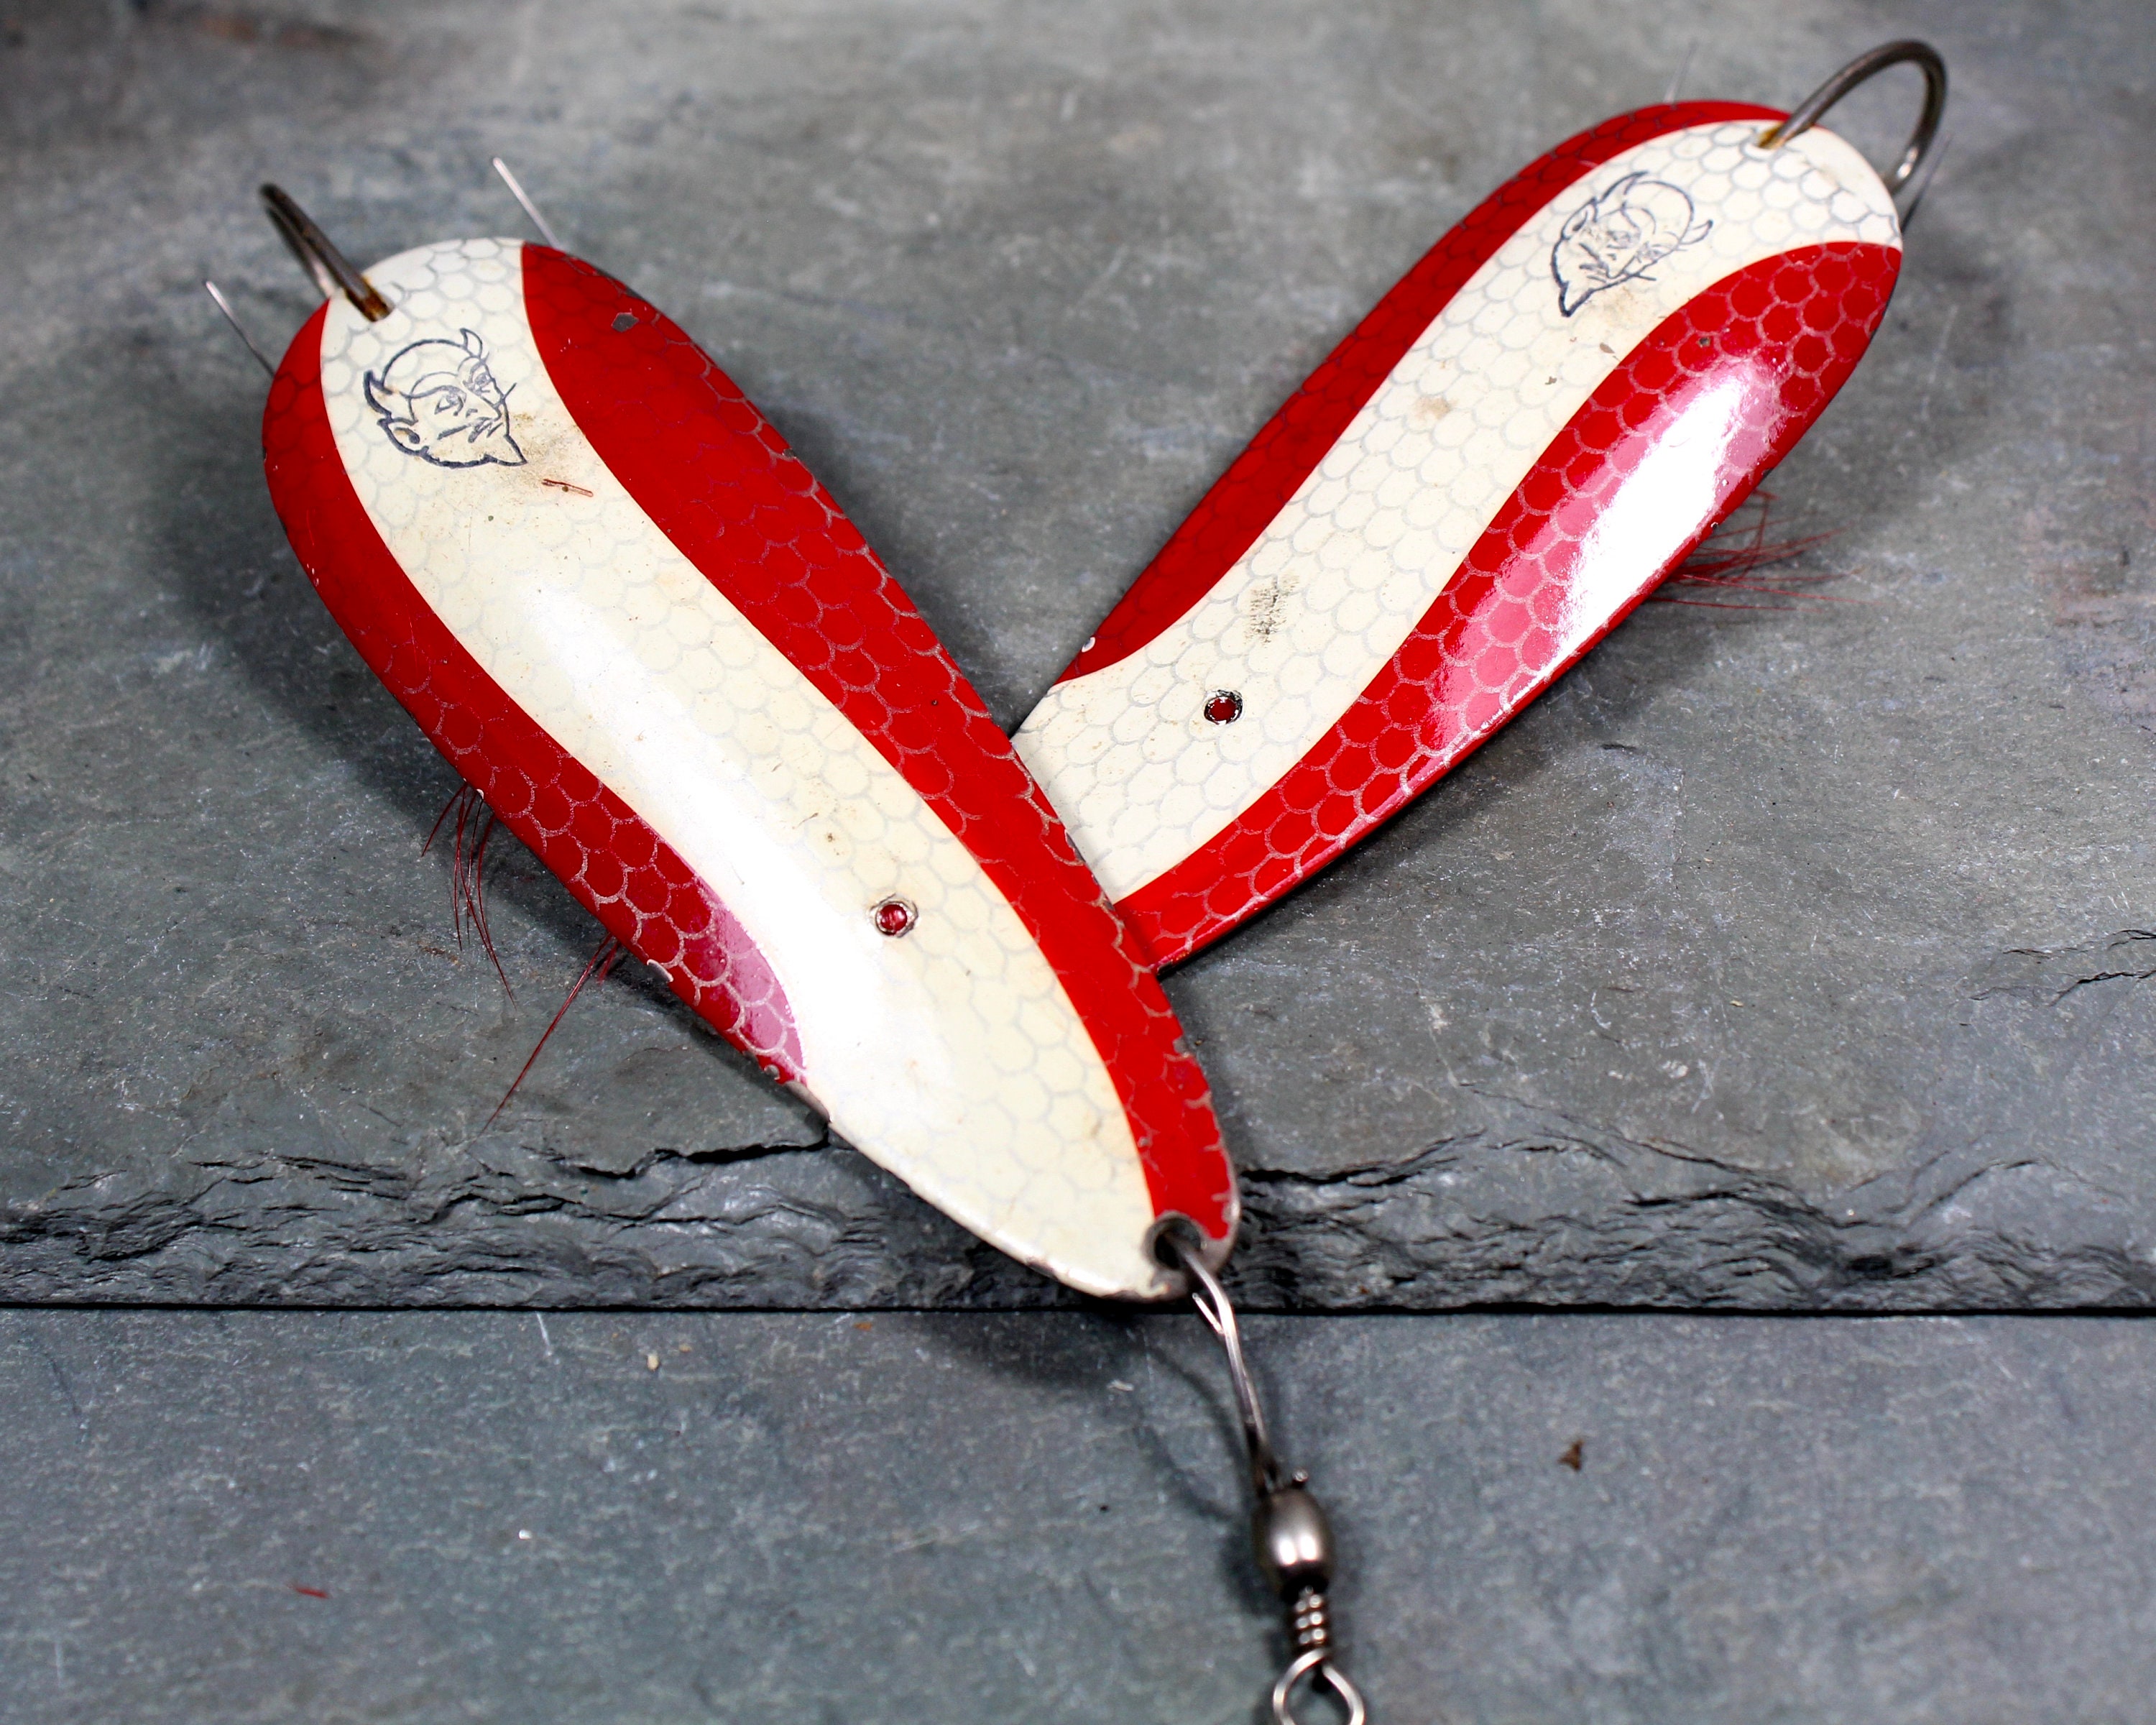 Vintage Daredevil Fishing Lures Set of 2 Circa 1950s Classic Red & White  Metal Lures FREE SHIPPING 